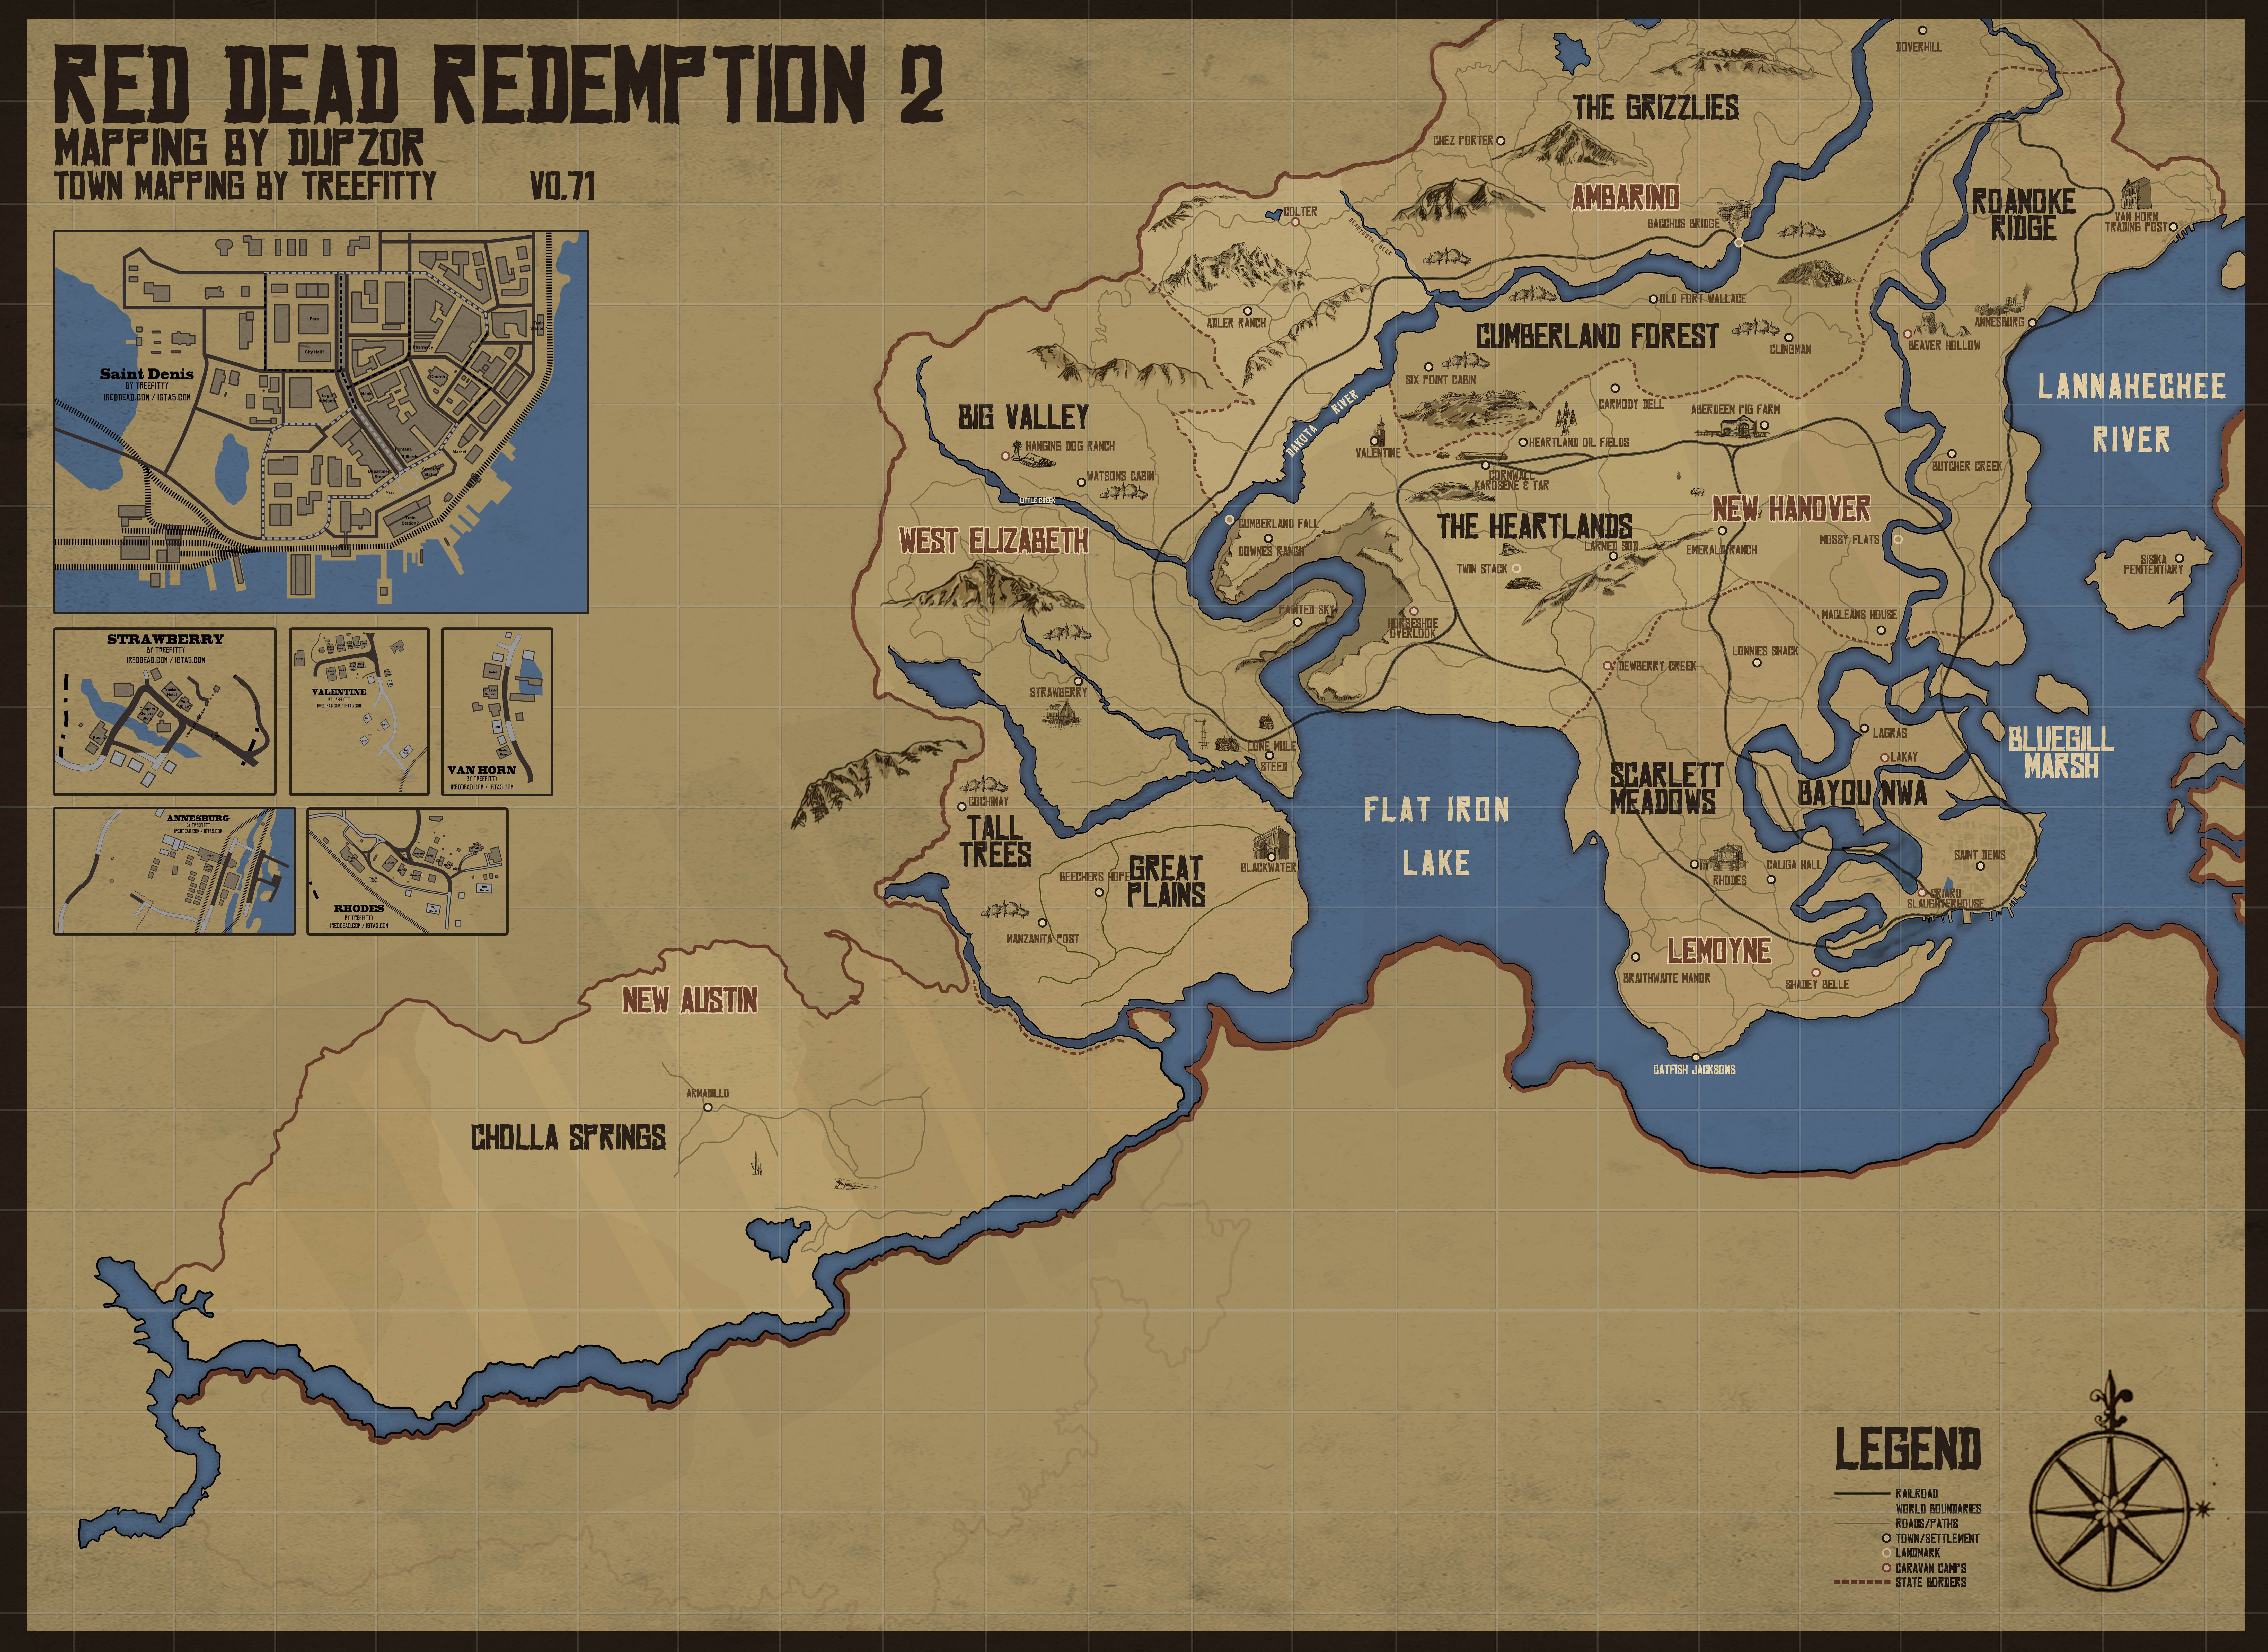 Red Dead Redemption 2 Map Comparison Red Dead Redemption II ~*SPOILER THREAD*~ | Page 15 | ResetEra